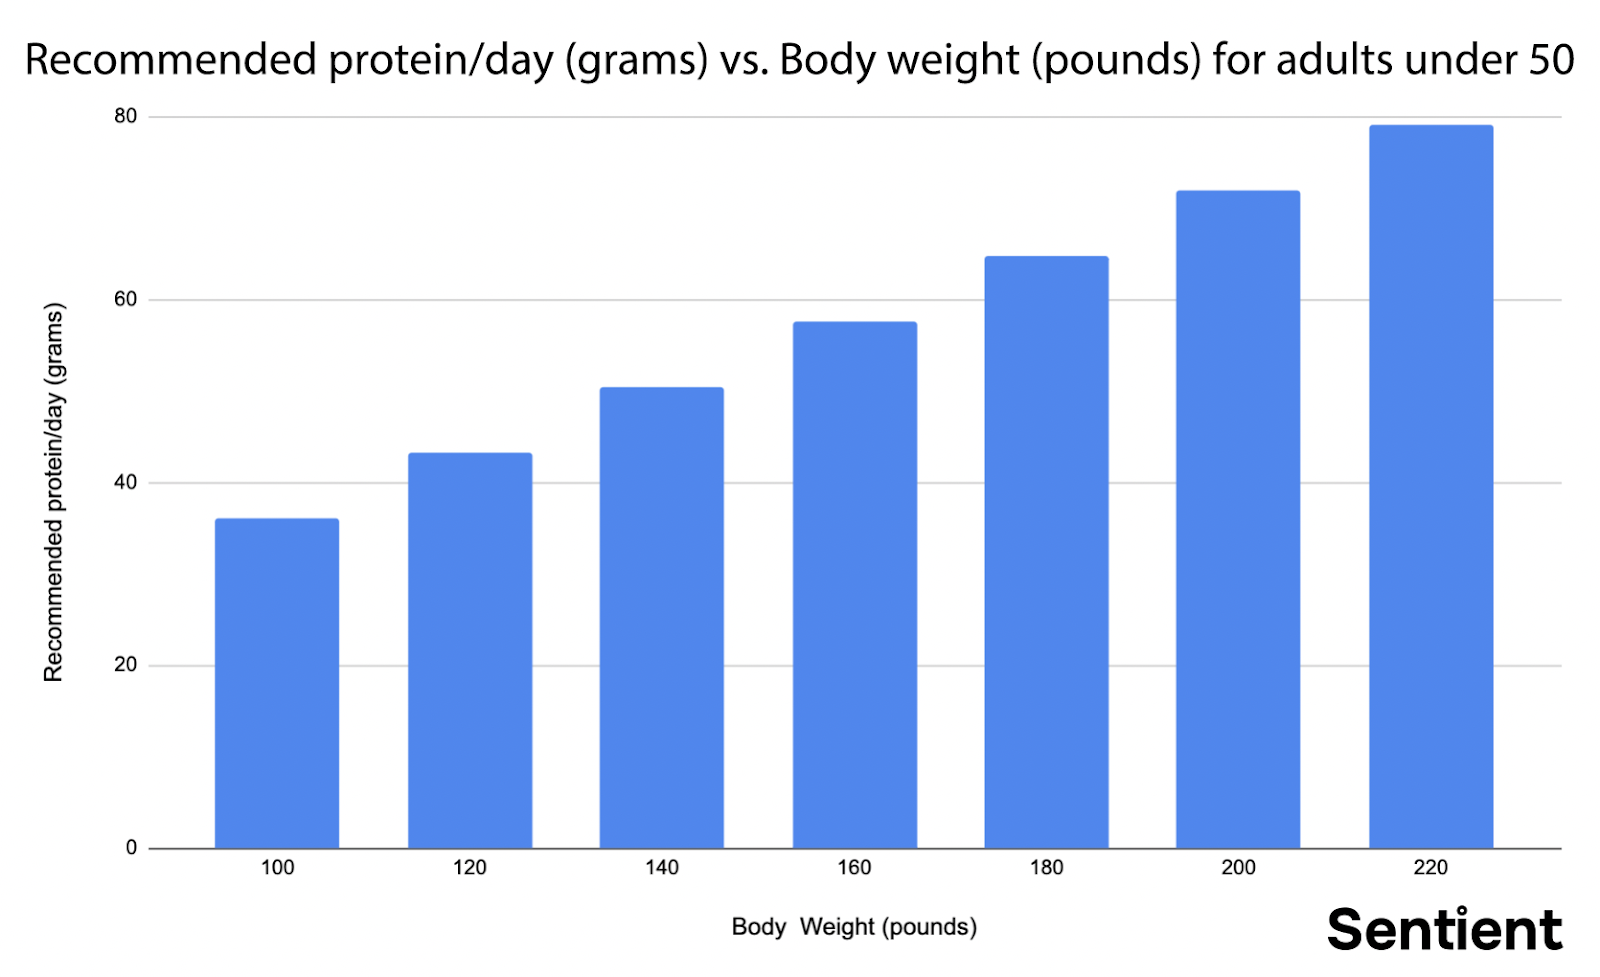 Bar graph showing recommended protein/day (grams) vs Body weight (pounds) for adults over 50